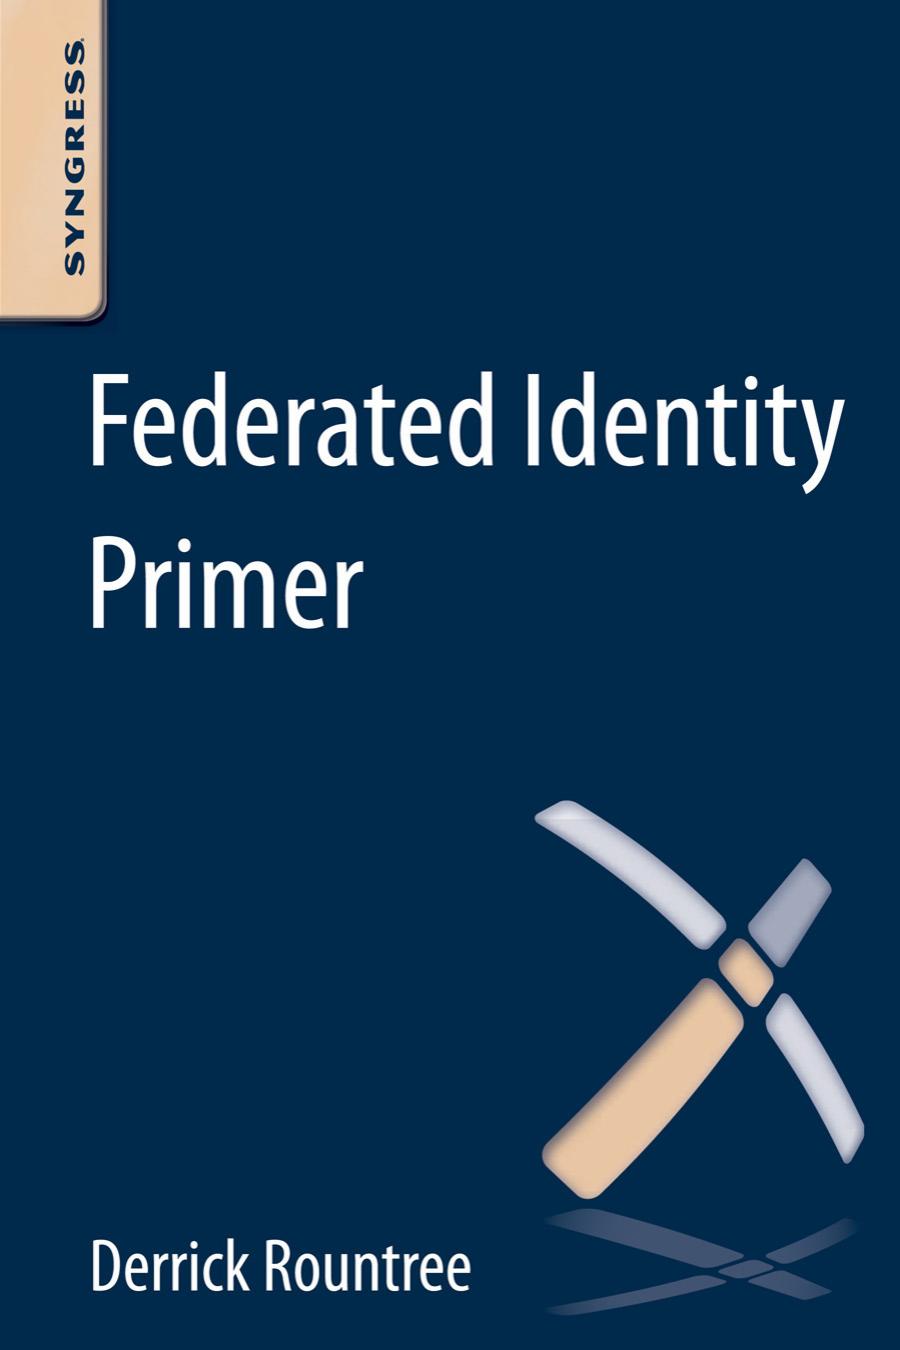 Federated Identity Primer by Derrick Rountree